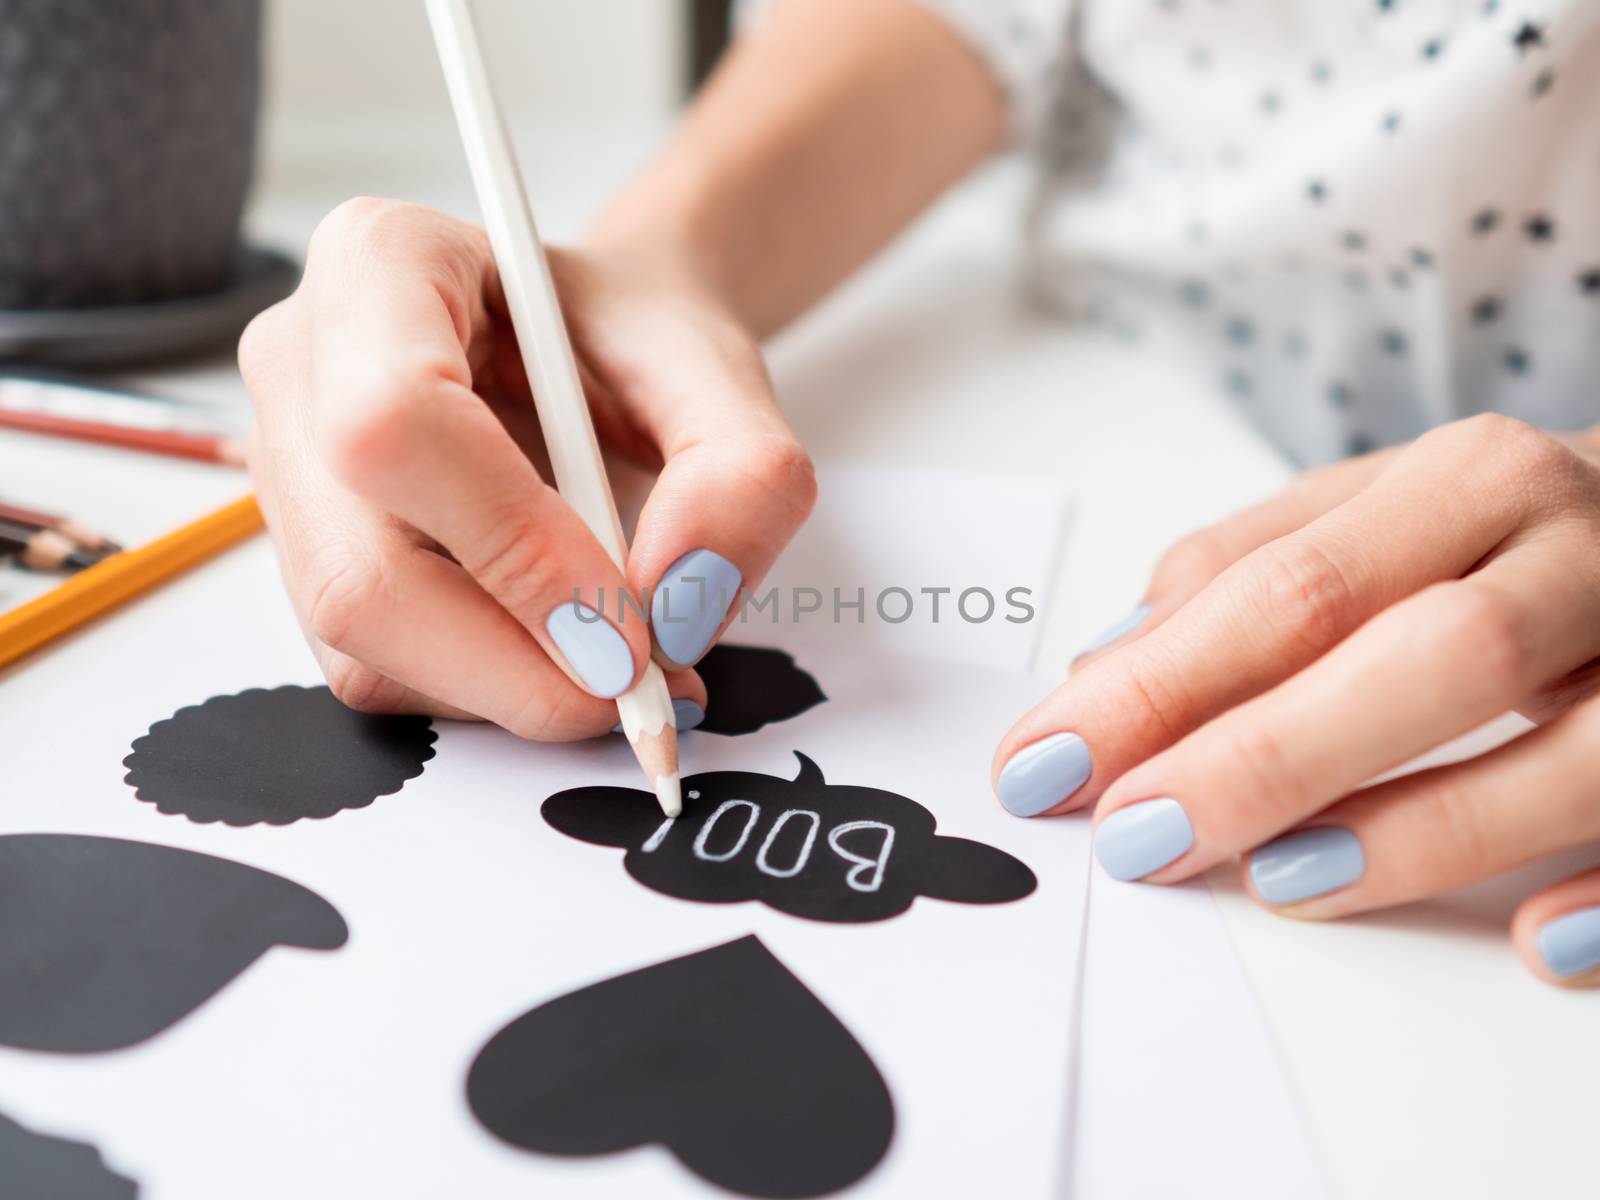 Woman writes Boo! on decorative black stickers for flower pots. Handmade decorations for Halloween.